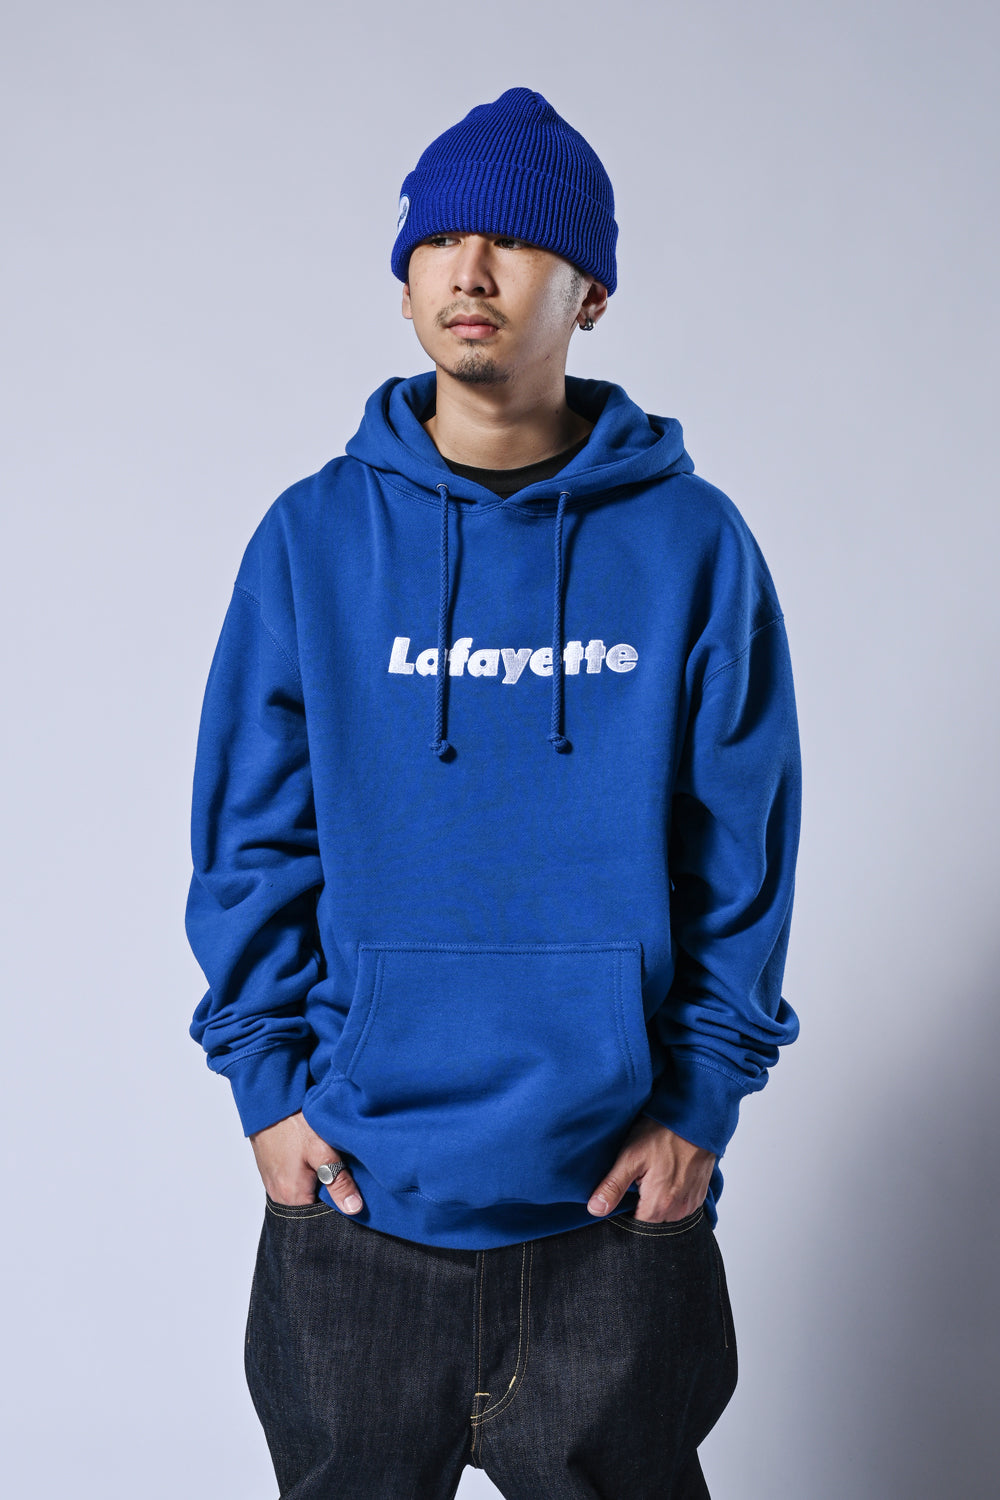 LFYT Lafayette LOGO HOODIE ROYAL×WHITE LE22 The Classic